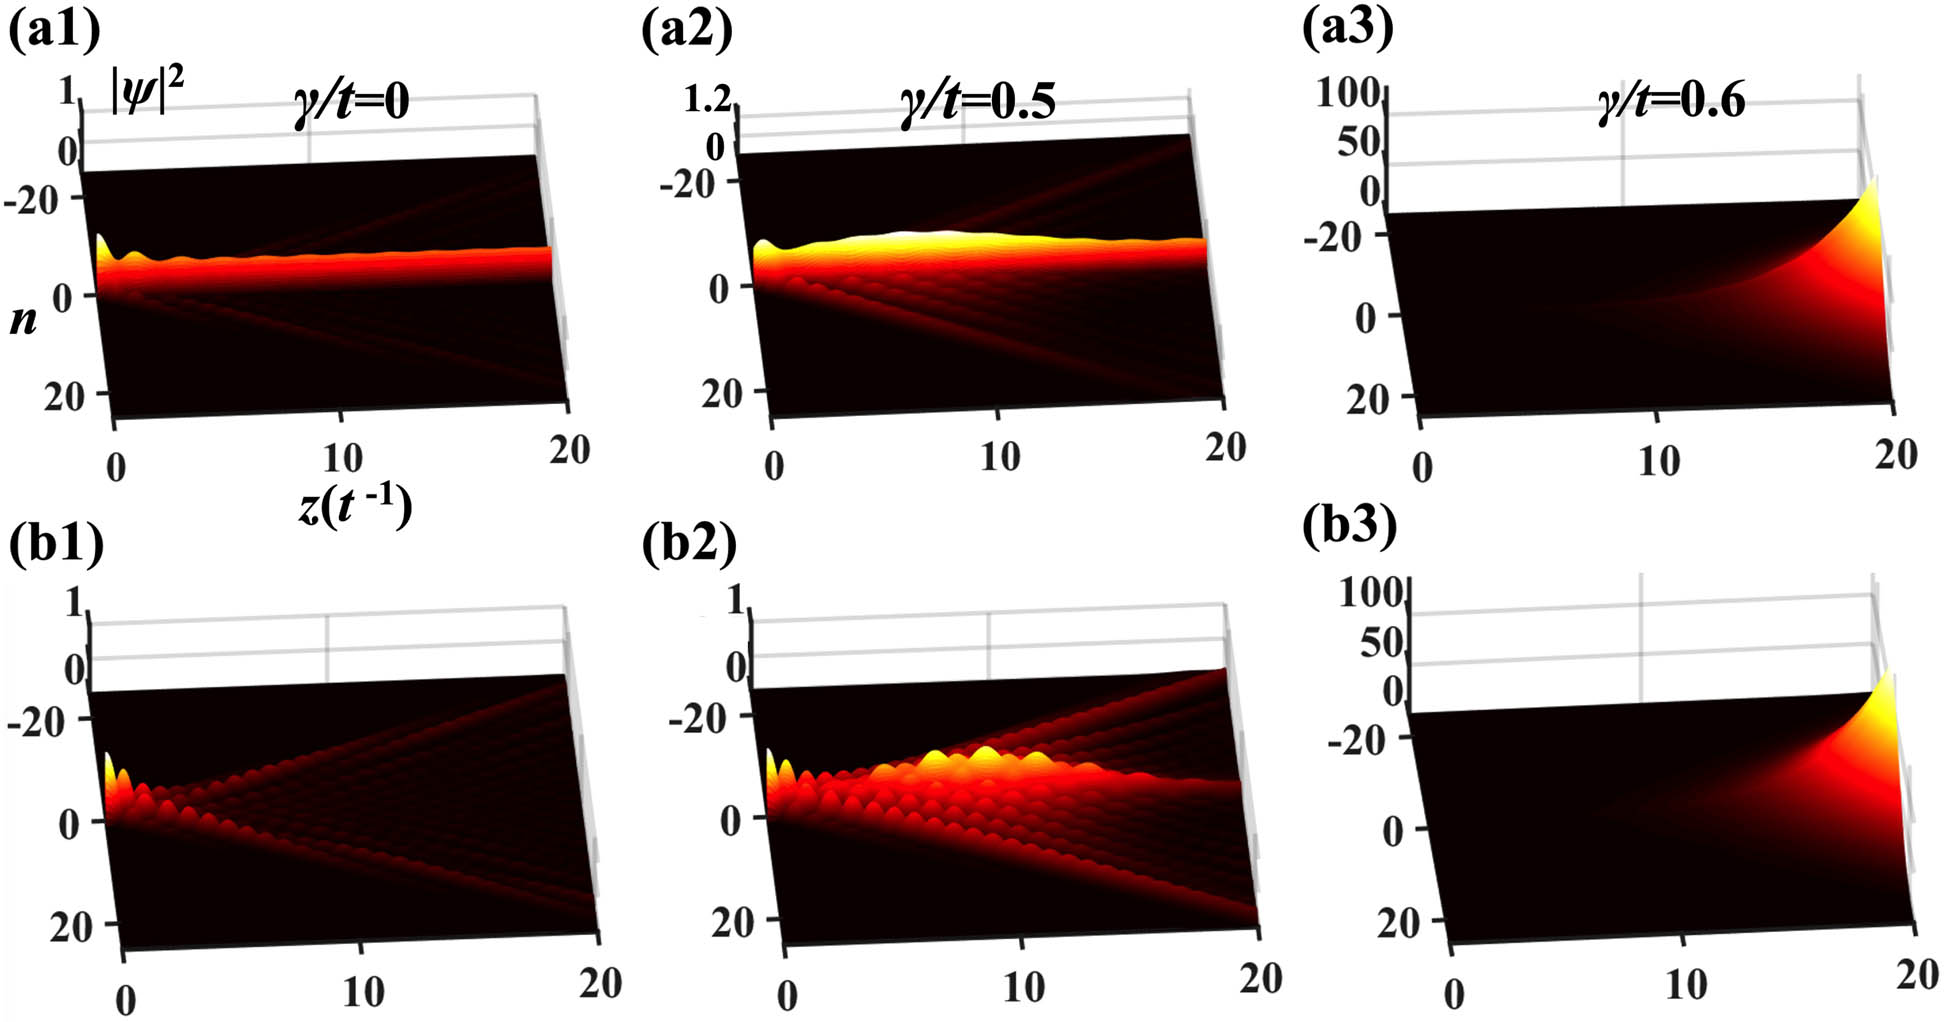 Intensity profile |ψ|2 of a single-site A (a1)–(a3) or B (b1)–(b3) excitation. (a1) The A sublattice excitation for Hermitian case (γ/t=0) exhibits a suppression of diffraction due to the excitation of flatband CLSs. (a2) The input remains conserved below the EP3 threshold (γ/t=0.5). (a3) The input leads to an exponentially growing total intensity in the PT-broken phase (γ/t=0.6). (b1) The B site excitation for Hermitian case (γ/t=0), showing a typically discrete diffraction pattern. (b2) The input excites both the flatband and dispersive bands, producing discrete diffraction as well as a residual localized component (γ/t=0.5). (b3) The input shows same exponential growth of total intensity as in (a3) (γ/t=0.6). The propagation length is z=20t−1. Note the different scales of the vertical axis in these panels, though the initial amplitudes of the excitation all equal 1.